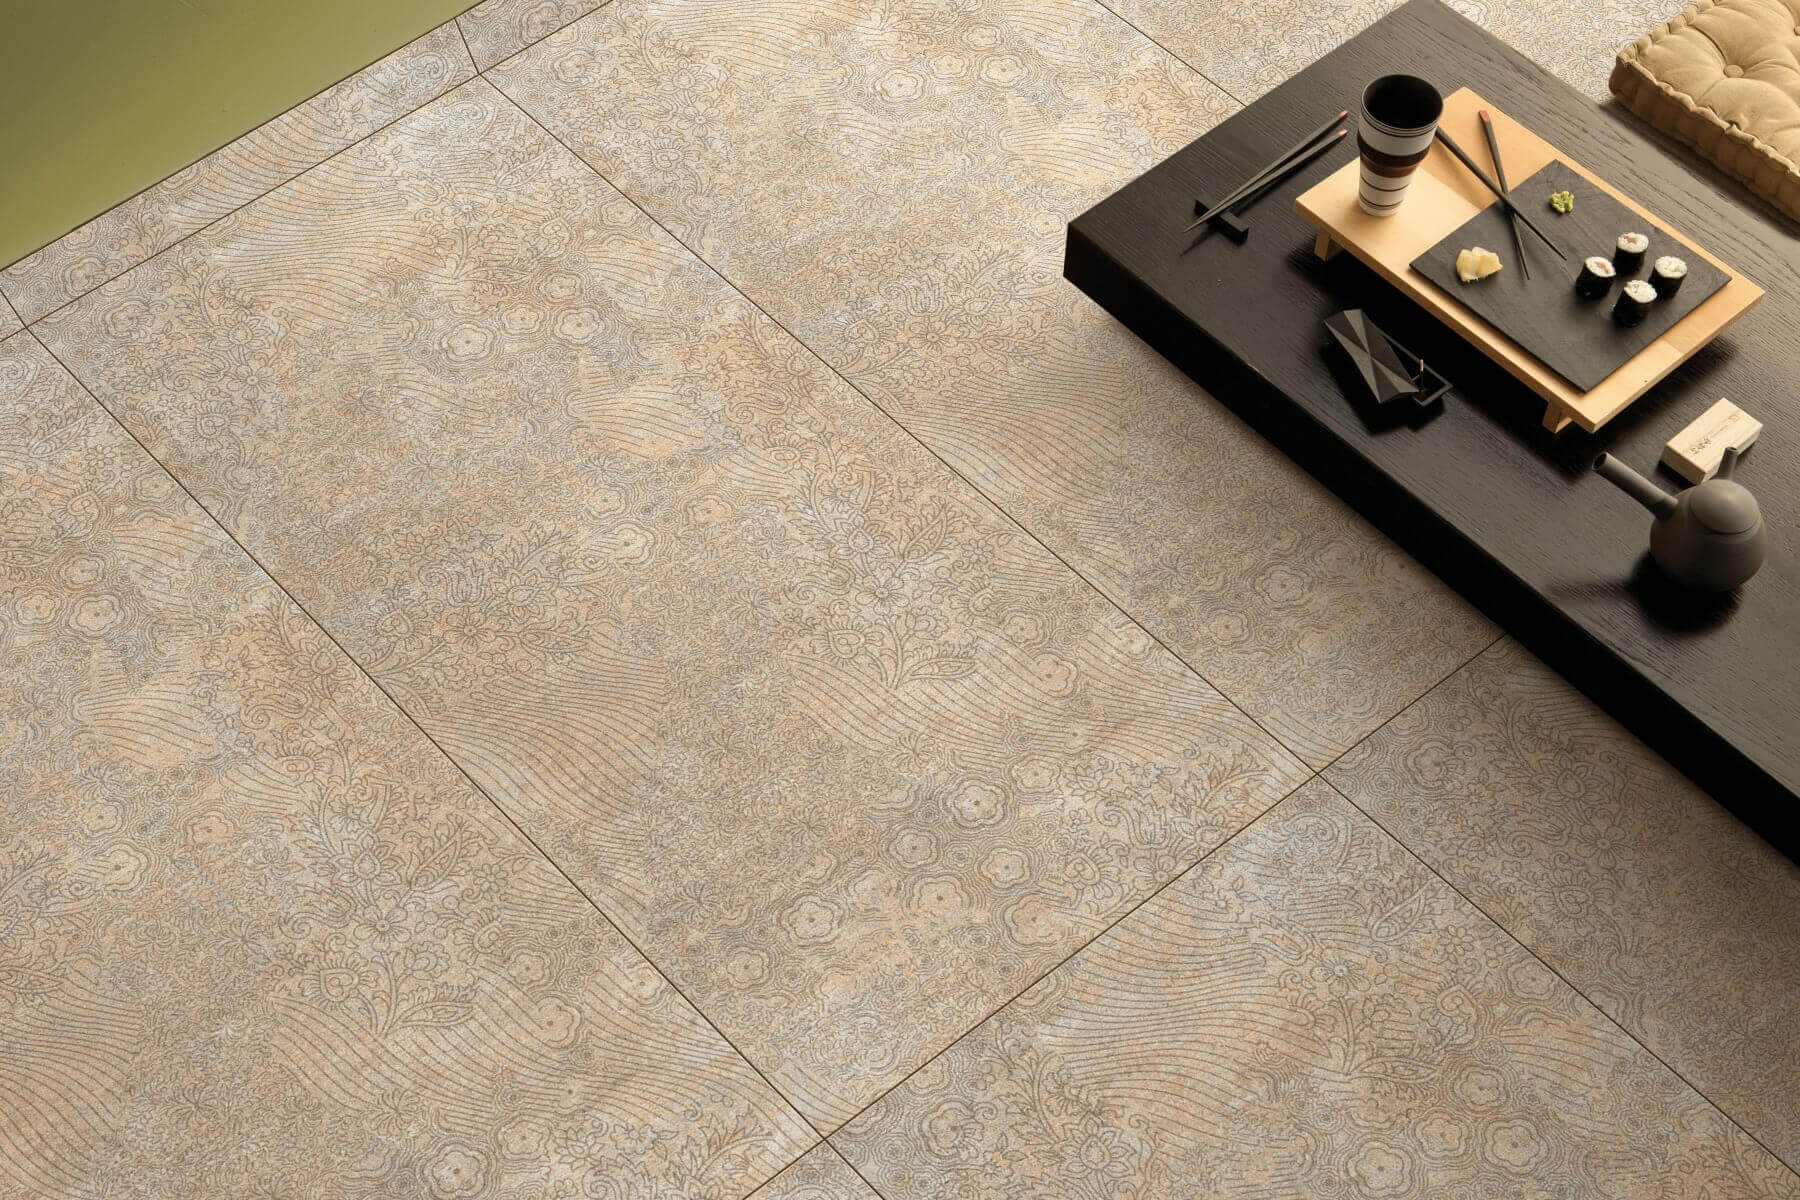 Commercial Tiles for Accent Tiles